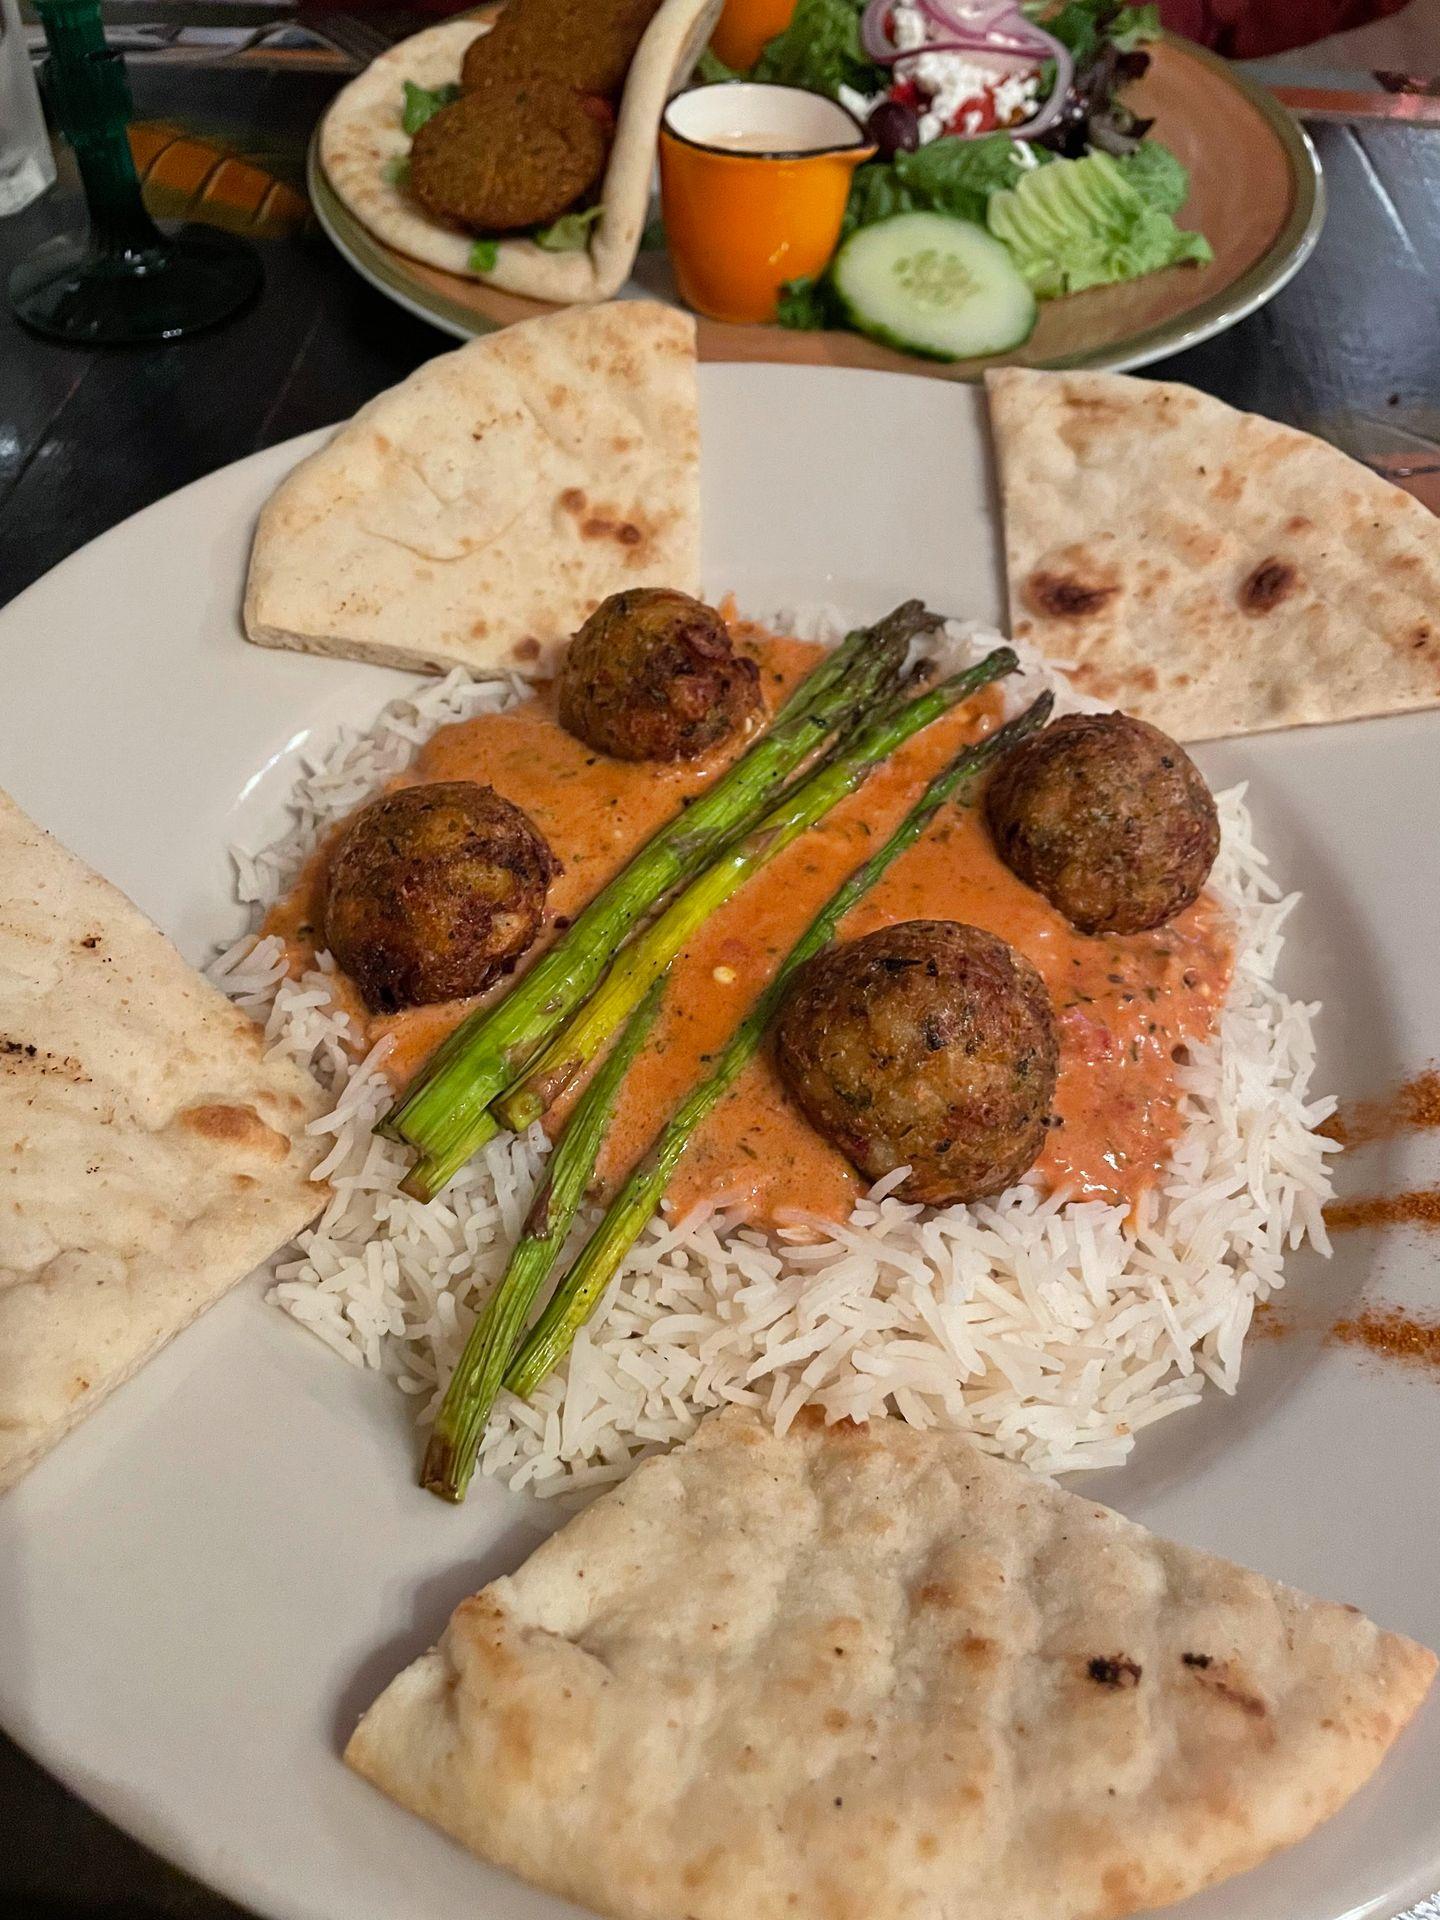 A dish of Malai Kofta from Gypsy Cafe. The meal includes rice, vegetarian meatballs, asparagus and pita bread.